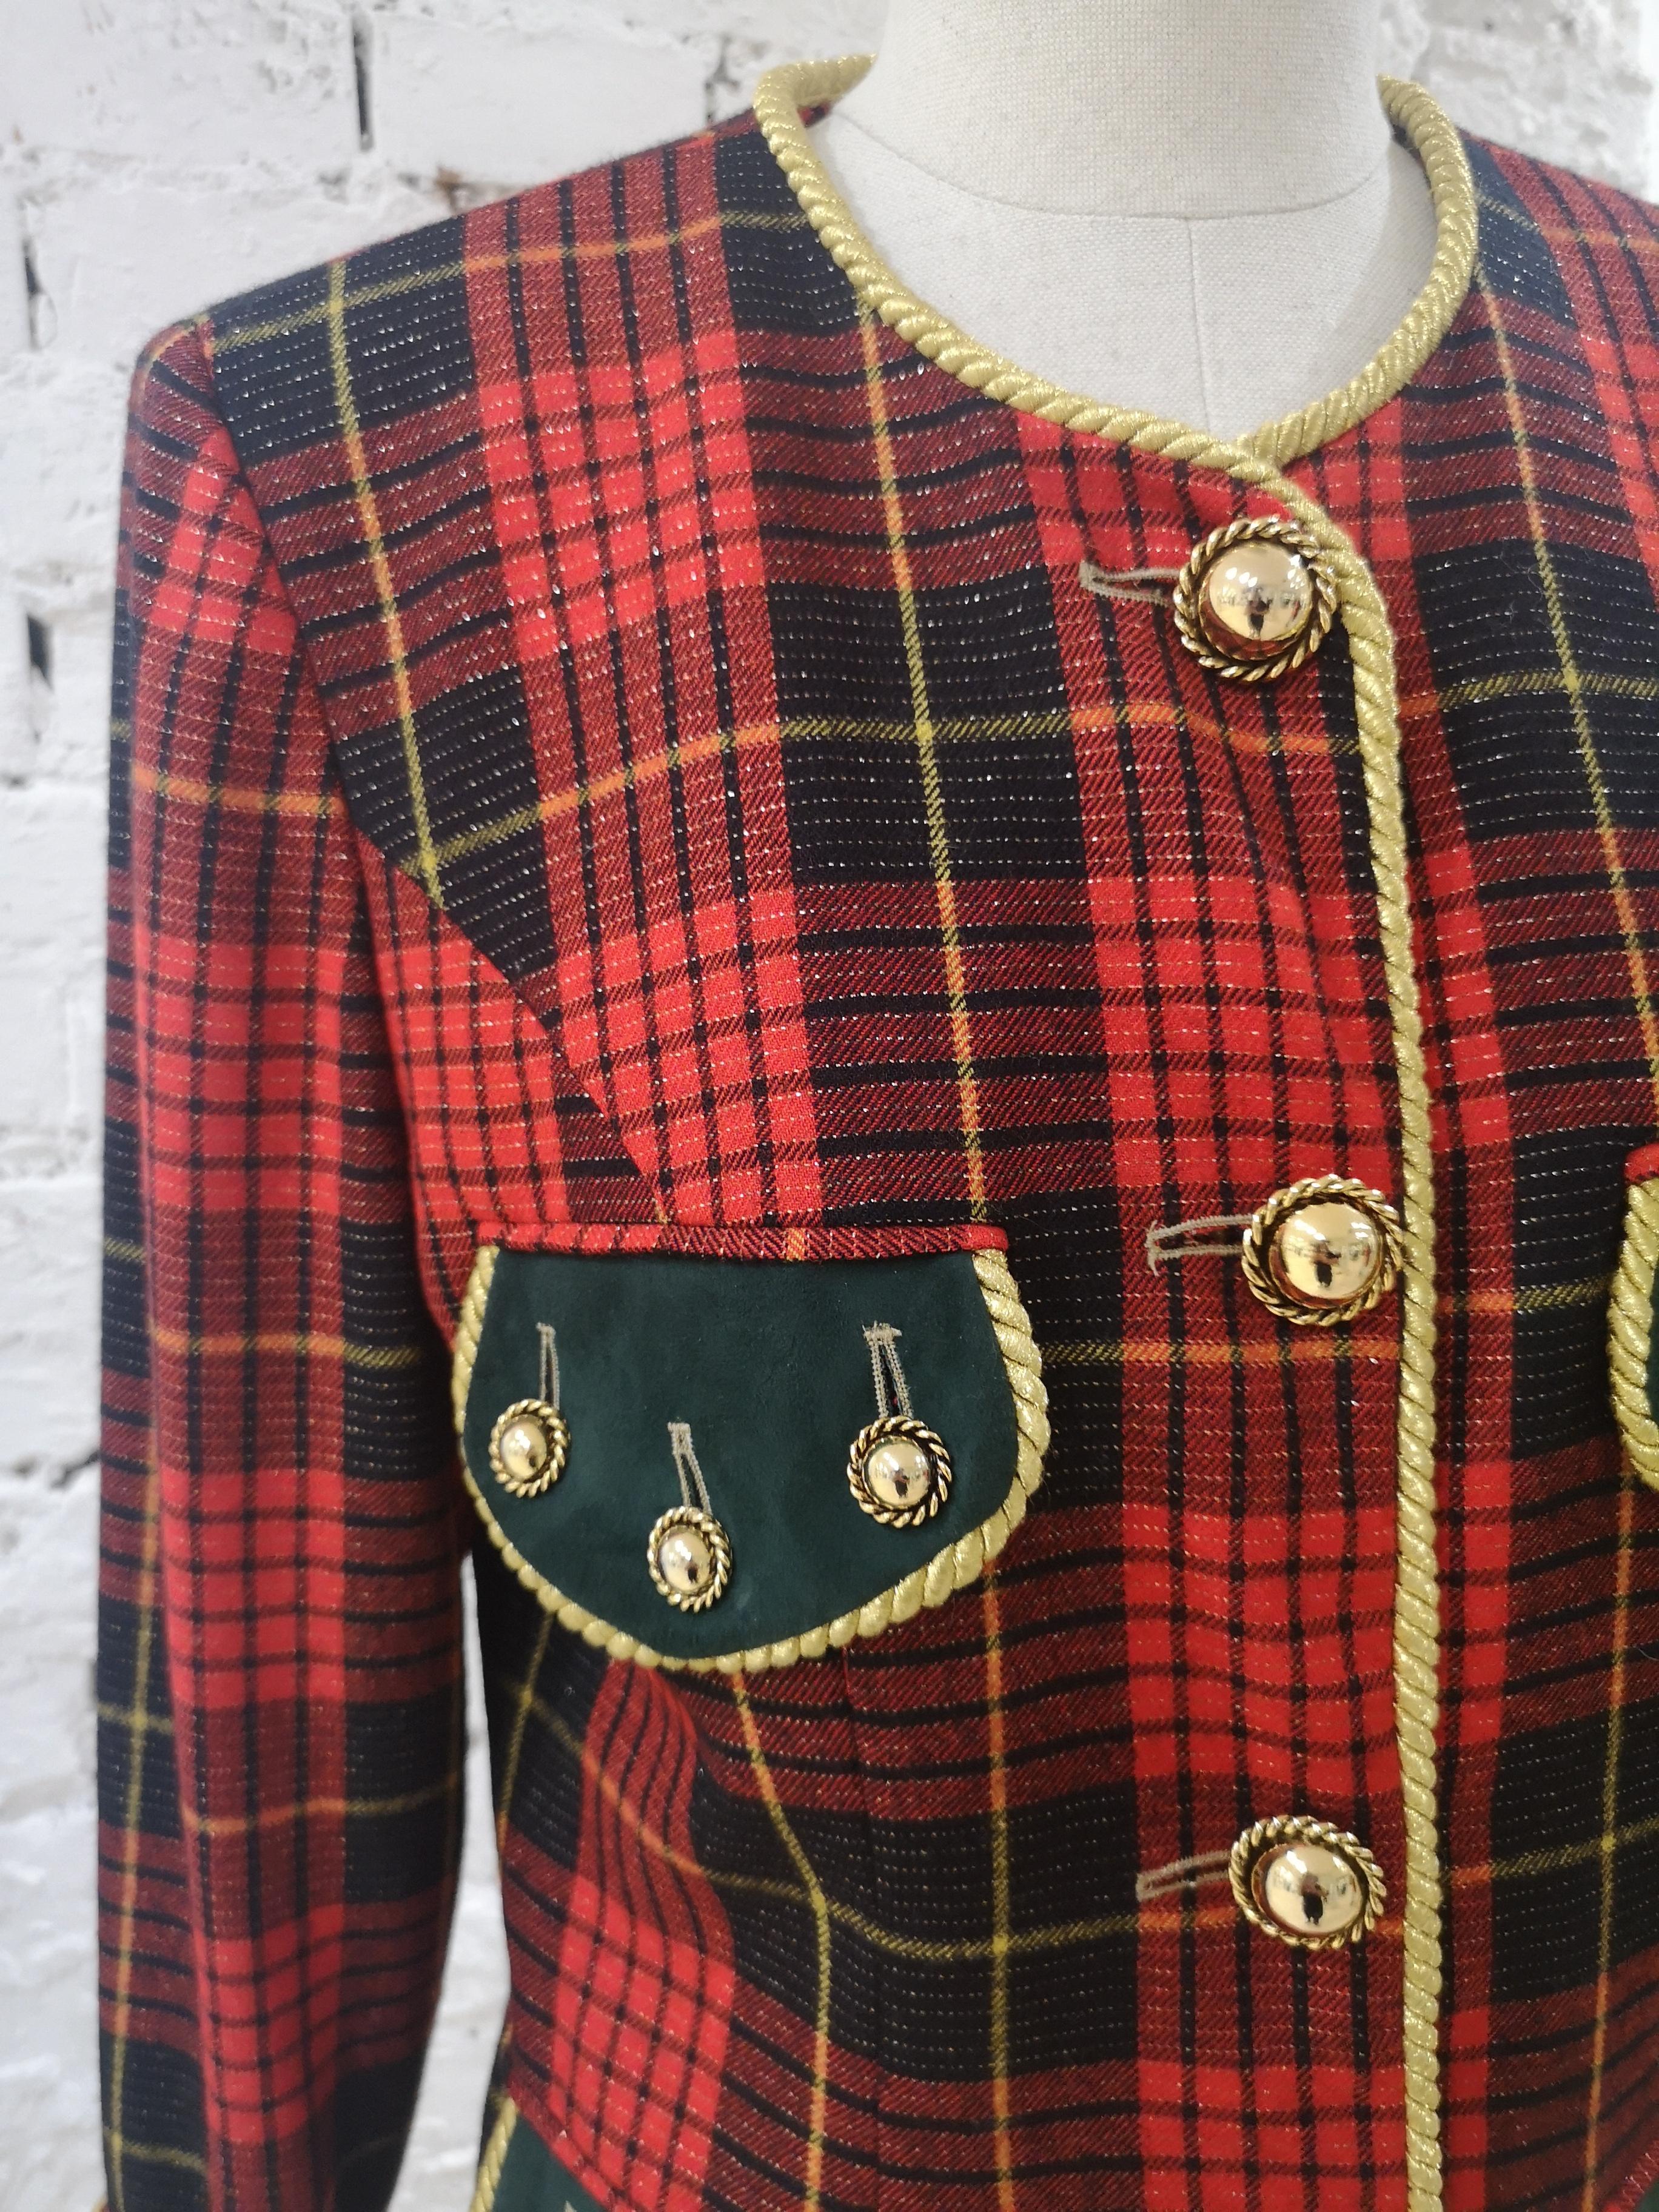 Moschino couture tartan vintage jacket
totally made in italy
composition wool
tasks are green velvet
embellished with gold tone buttons and gold tone trimming
size marked is 44
total lenght is 67 cm
shoulder to hem 61 cm